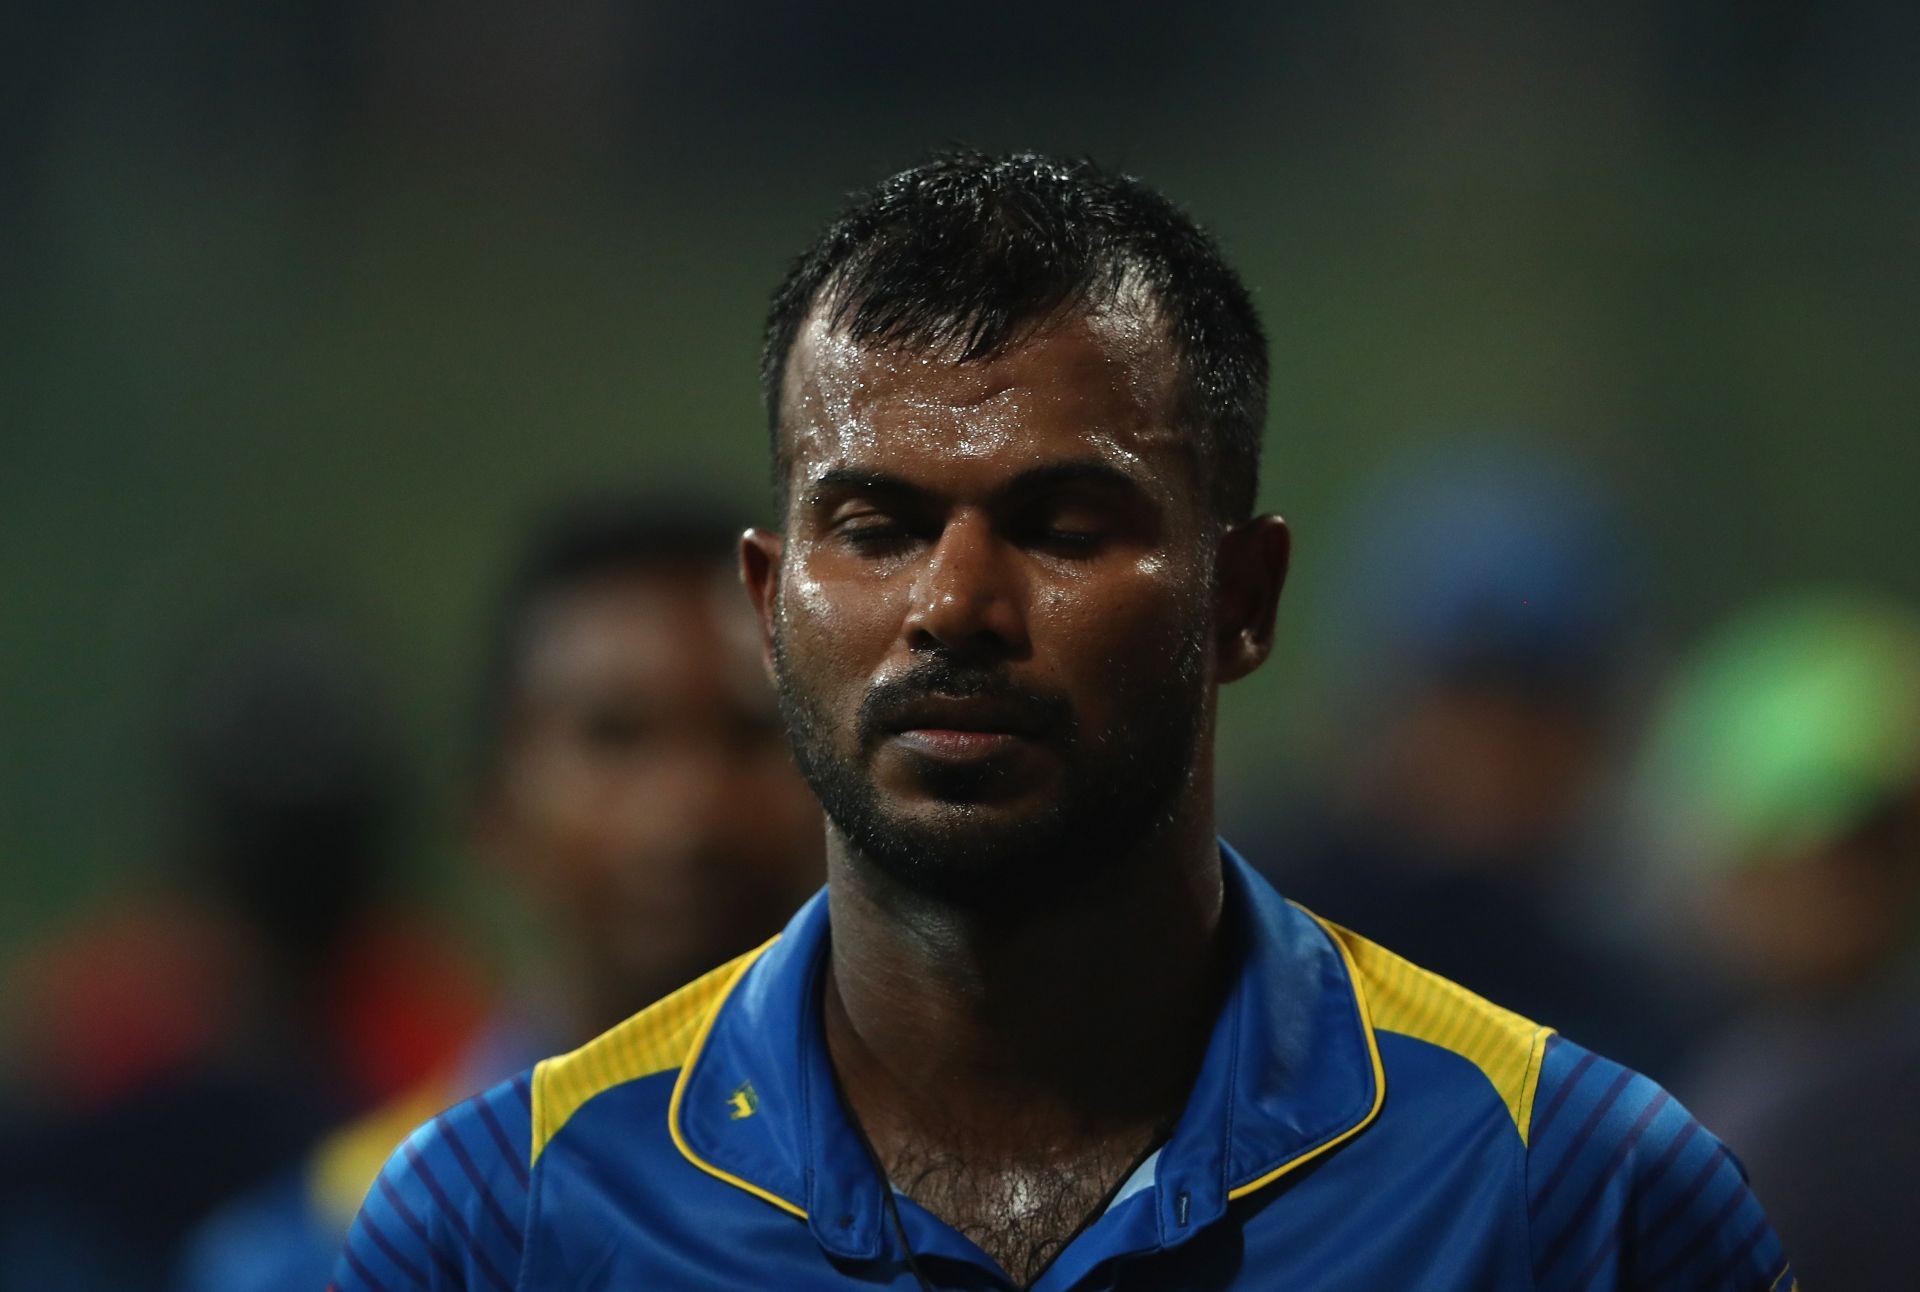 Upul Tharanga is one of the few Sri Lankan cricketers to have scored more than 9,000 runs